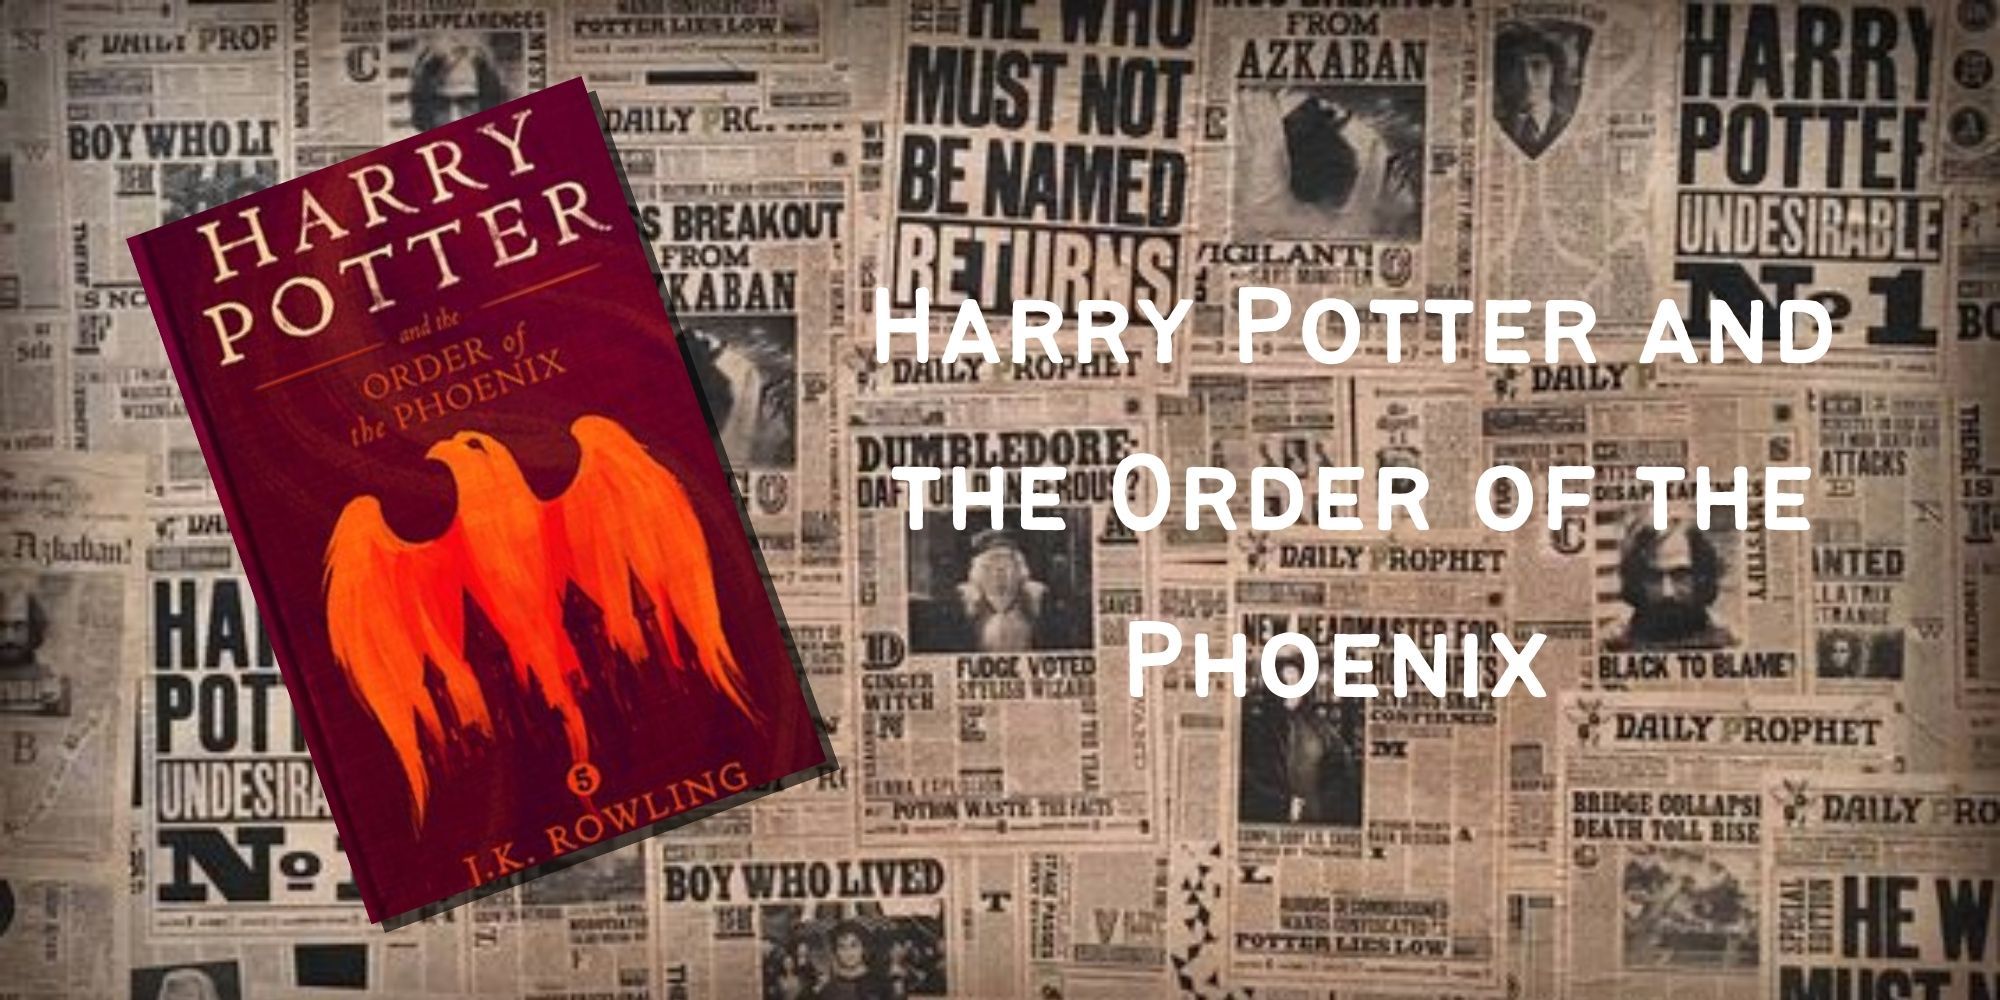 The cover of Harry Potter and the Order of the Phoenix 